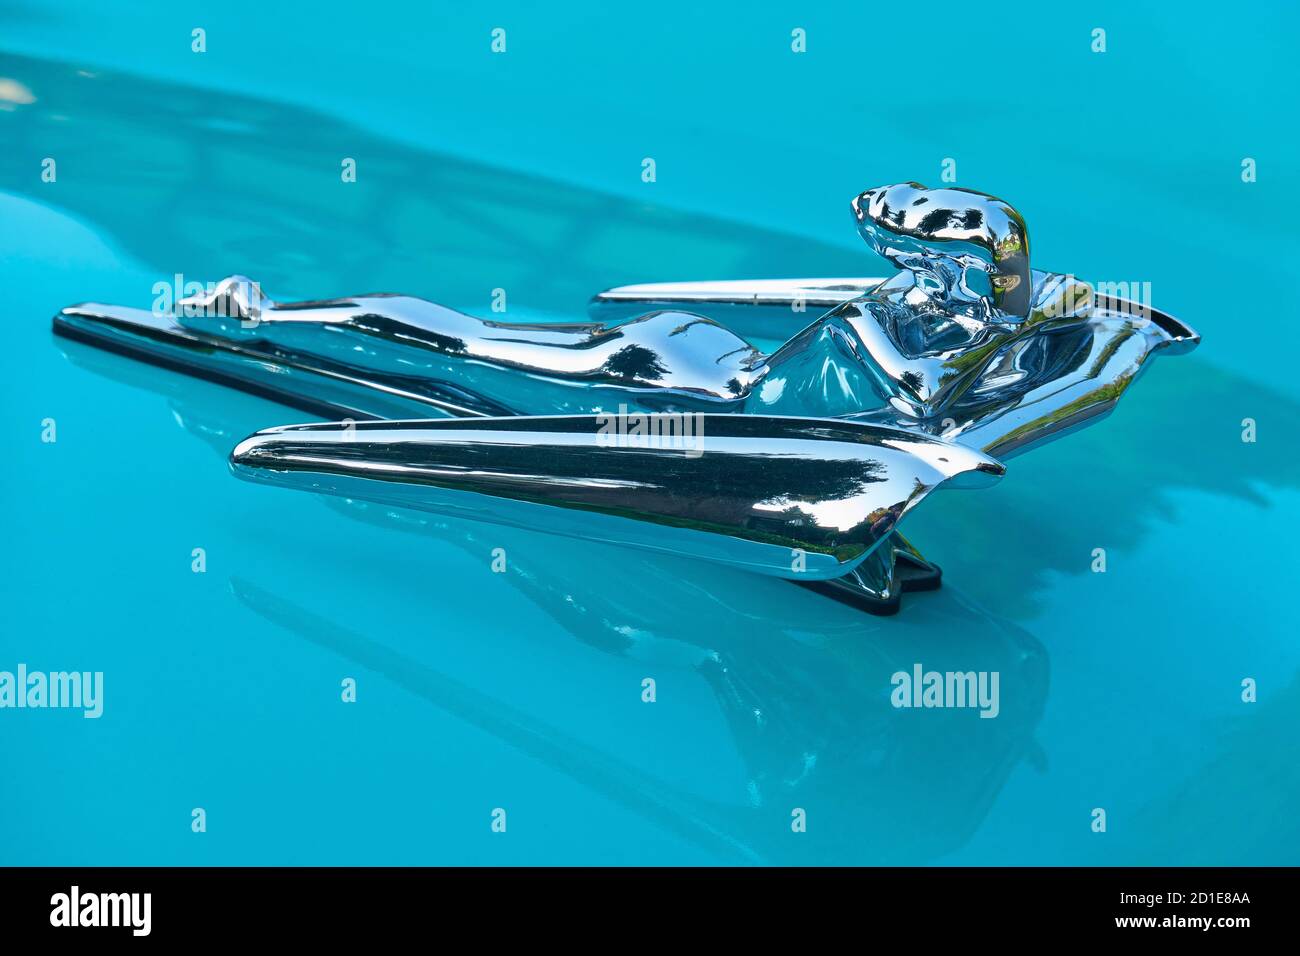 Flying Lady Hood Ornament on a turquoise 1956 Nash Metropolitan Collector Car. Stock Photo